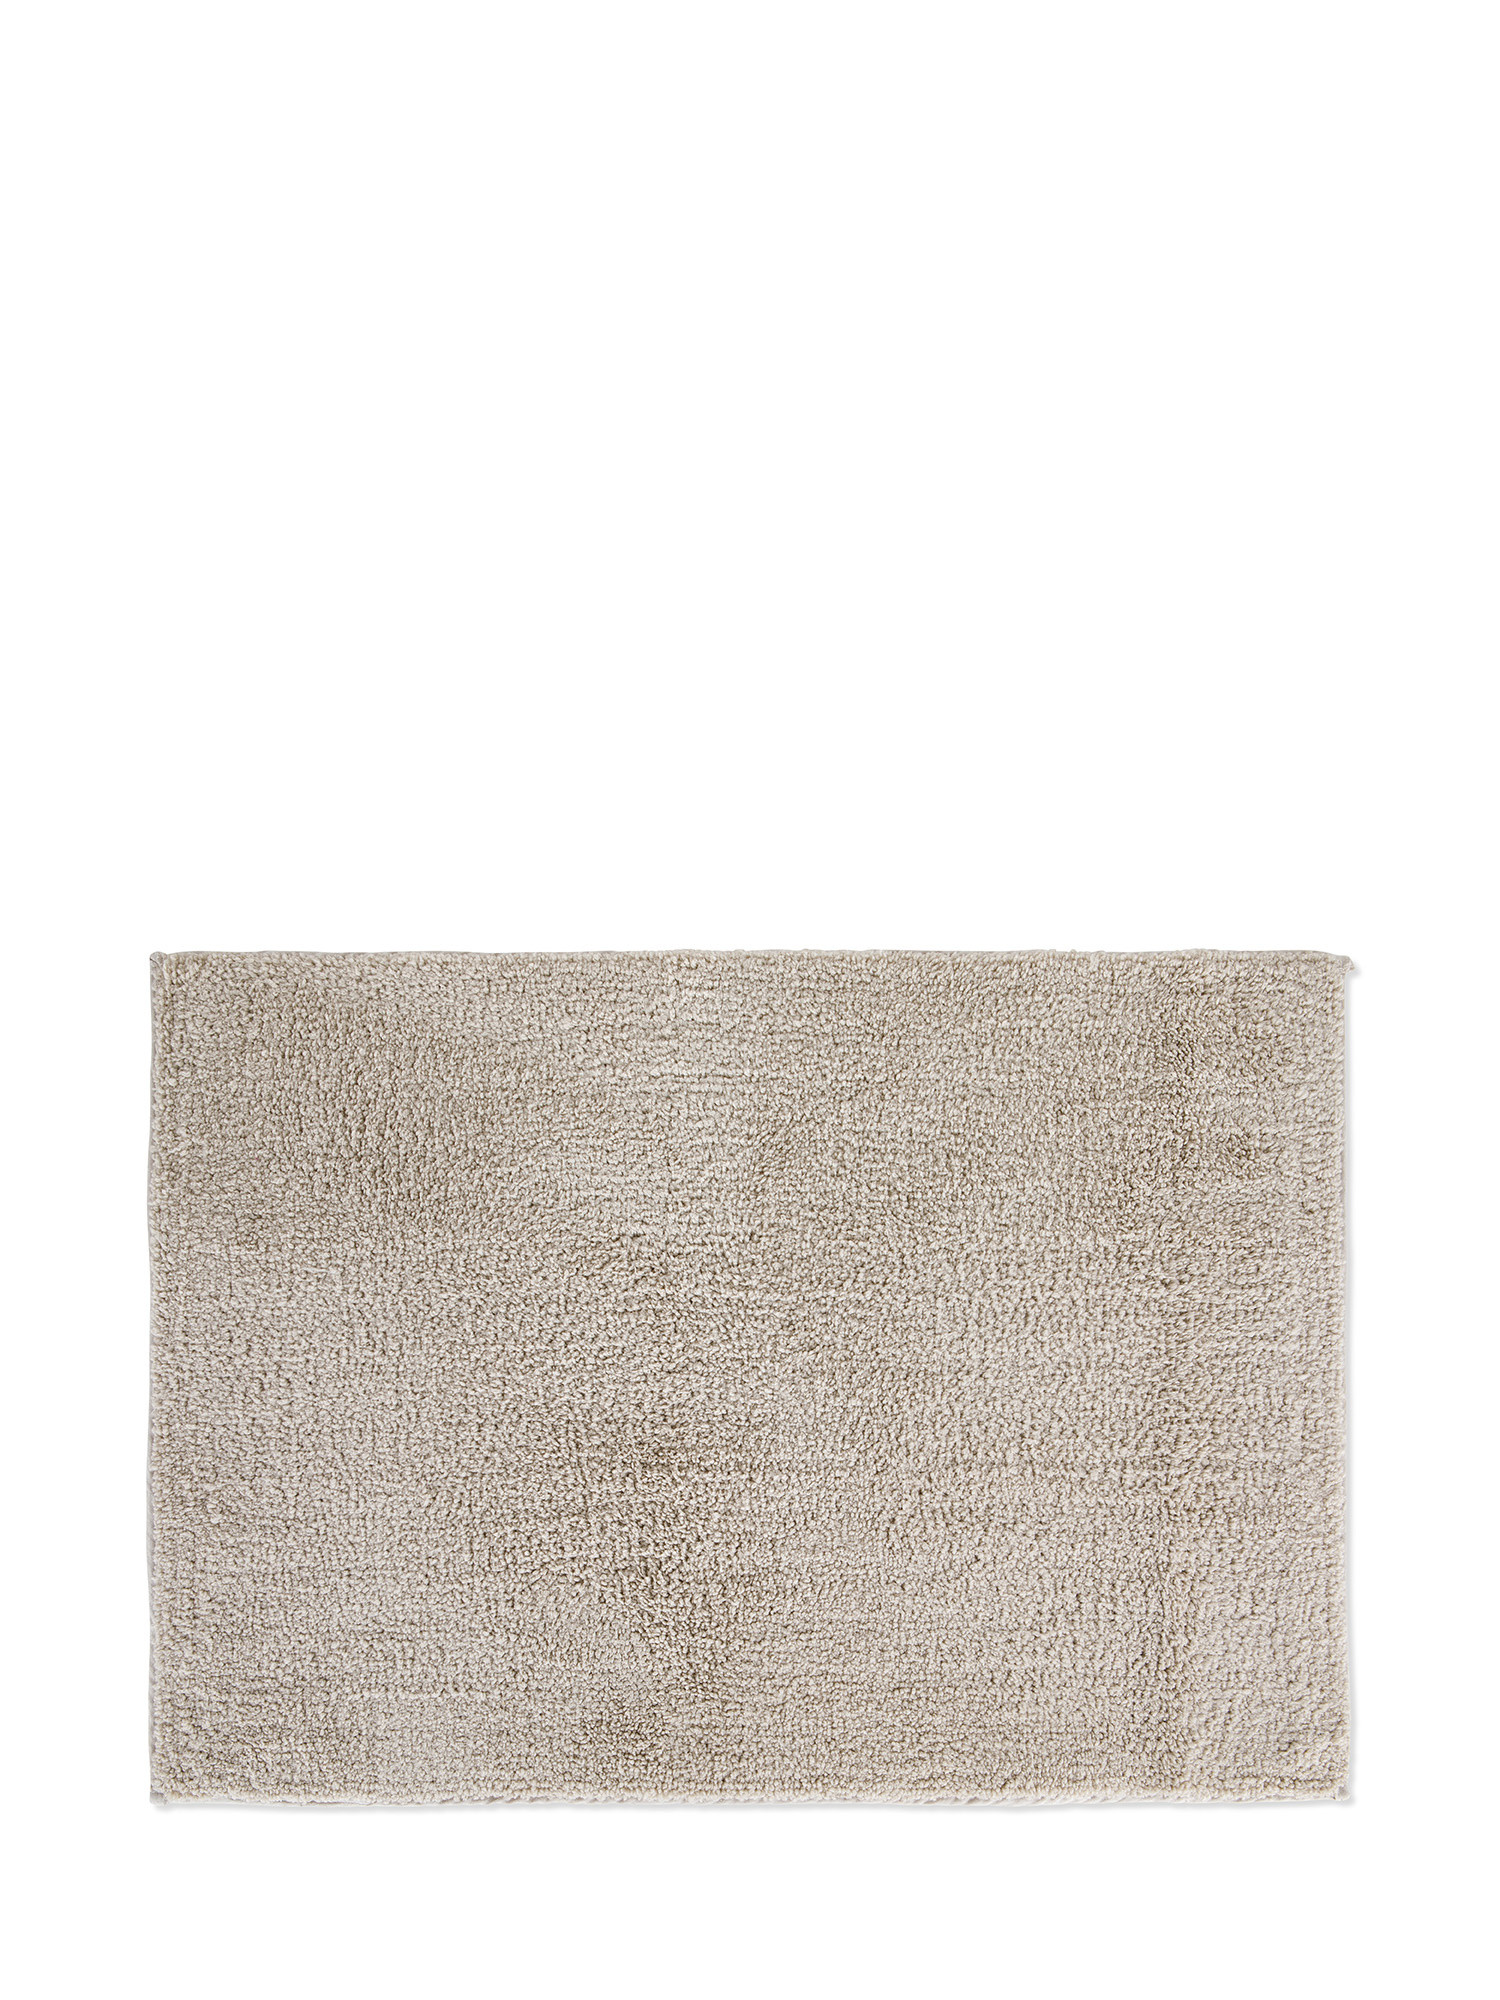 Tappeto bagno in micro poliestere, Beige, large image number 0